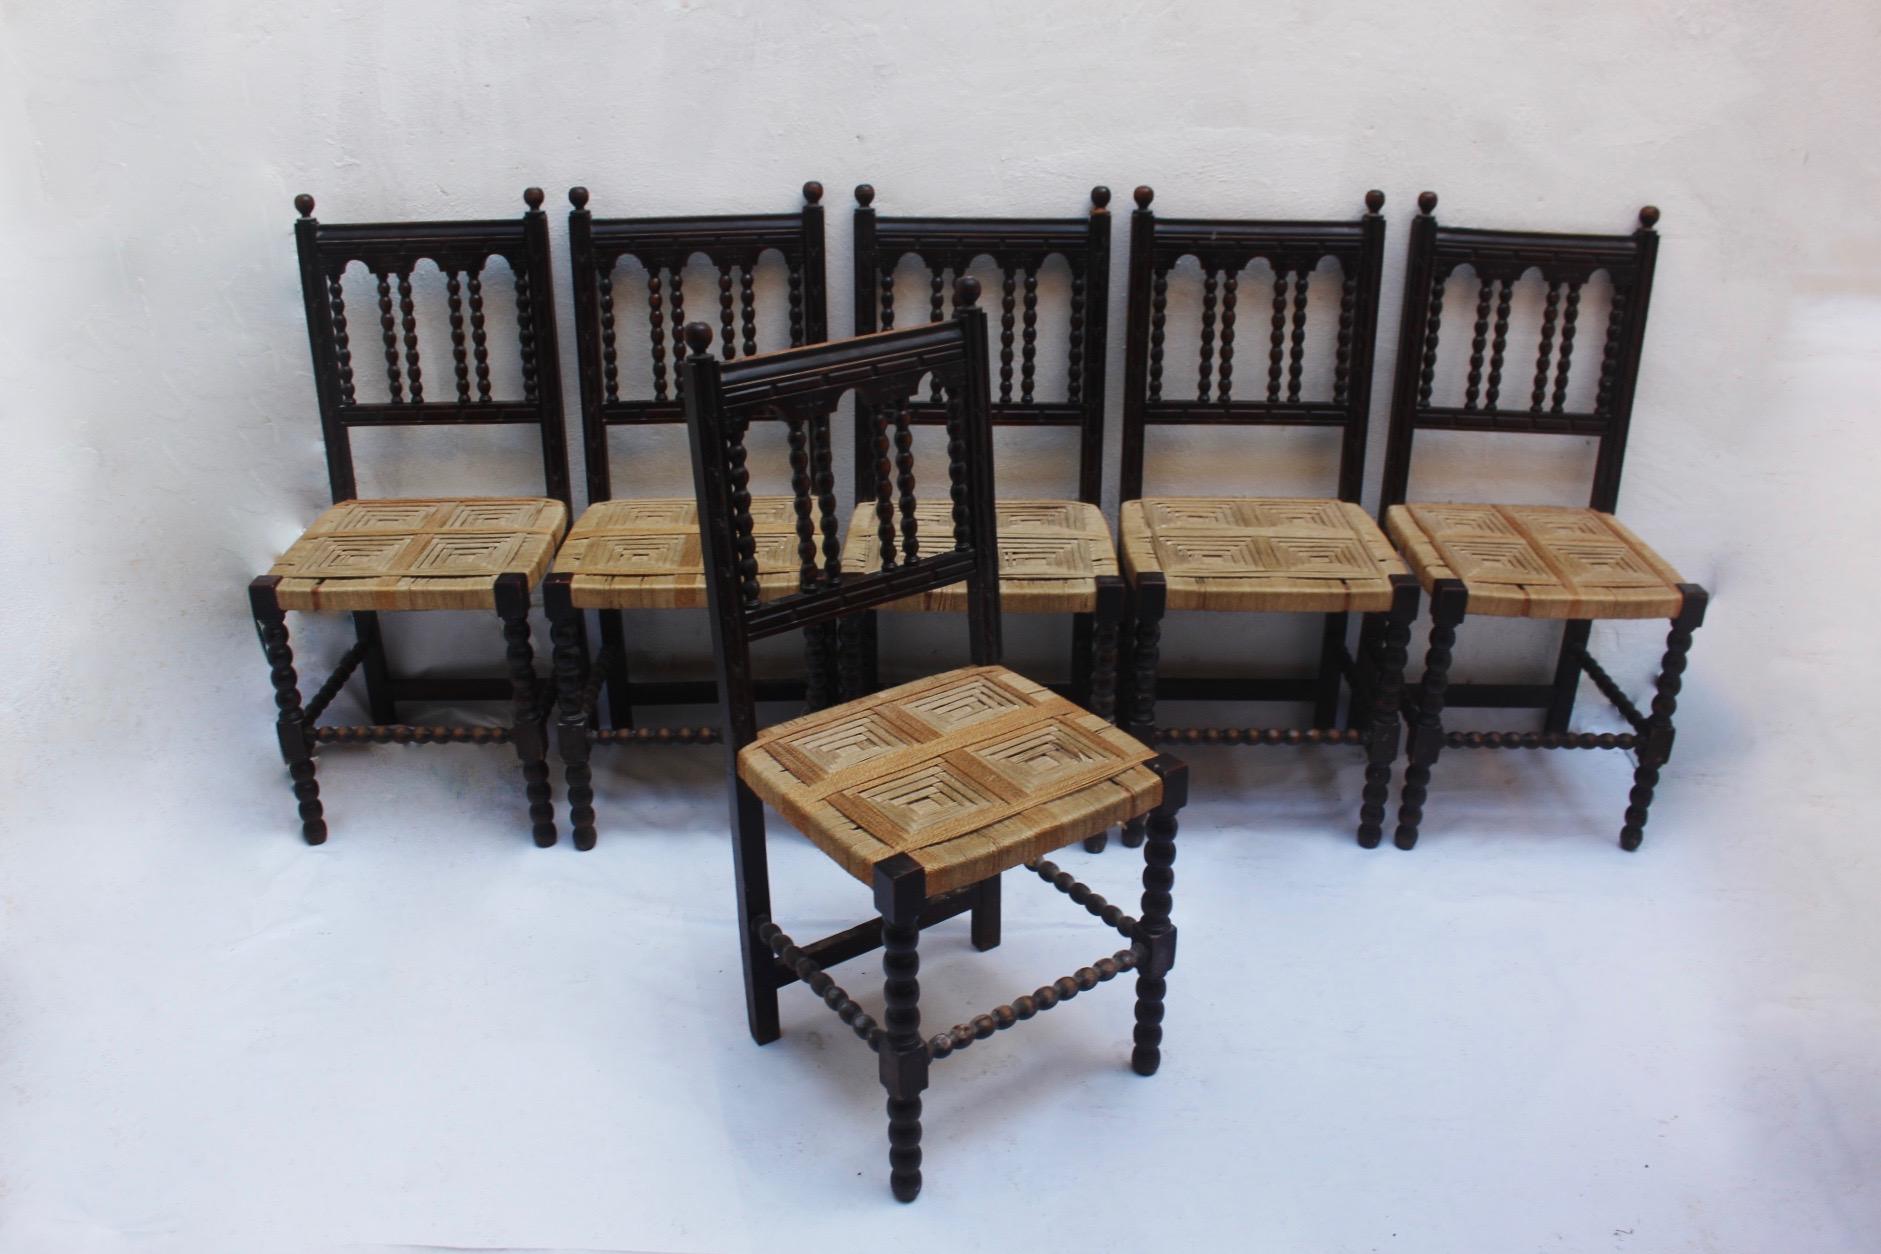 Spanish Baroque Revival Wood and Woven Dining Chair Made in Spain, 19th Century